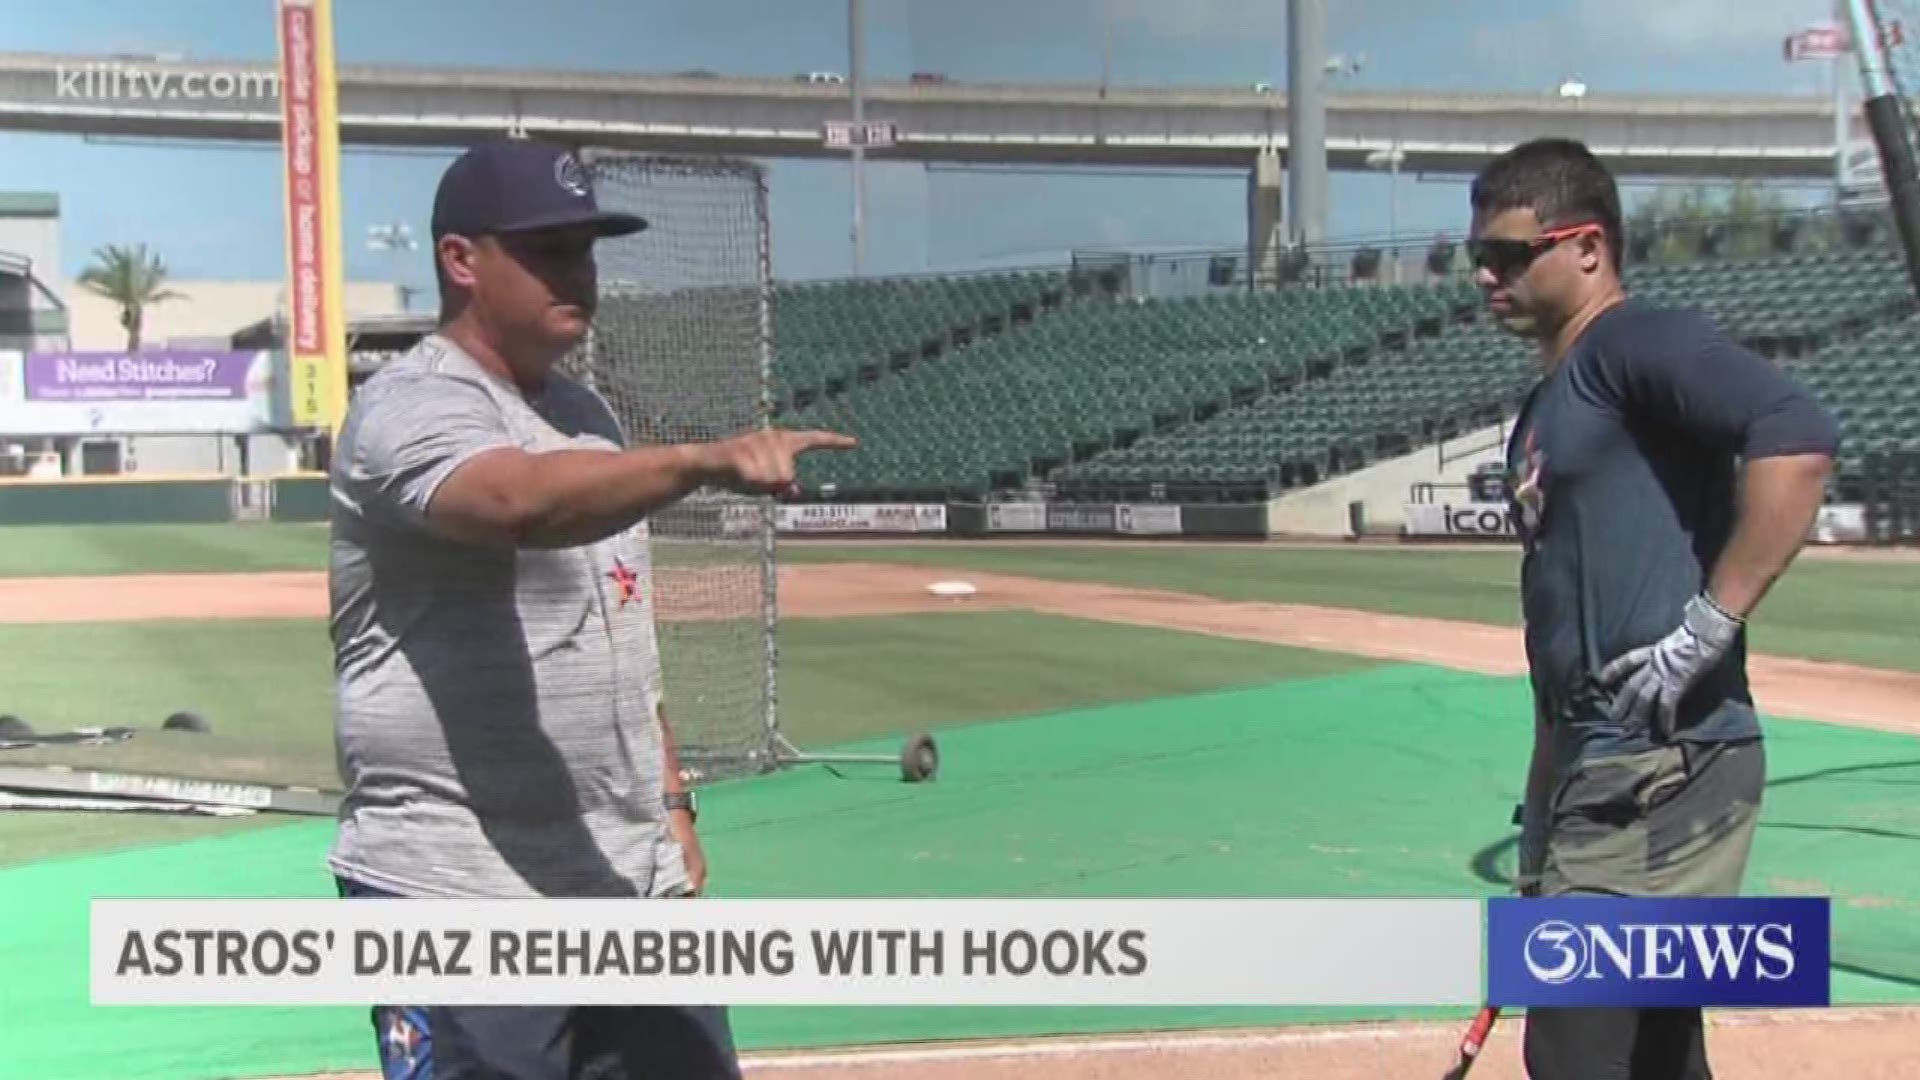 Diaz is with the Hooks after making some previous rehab starts in Round Rock.